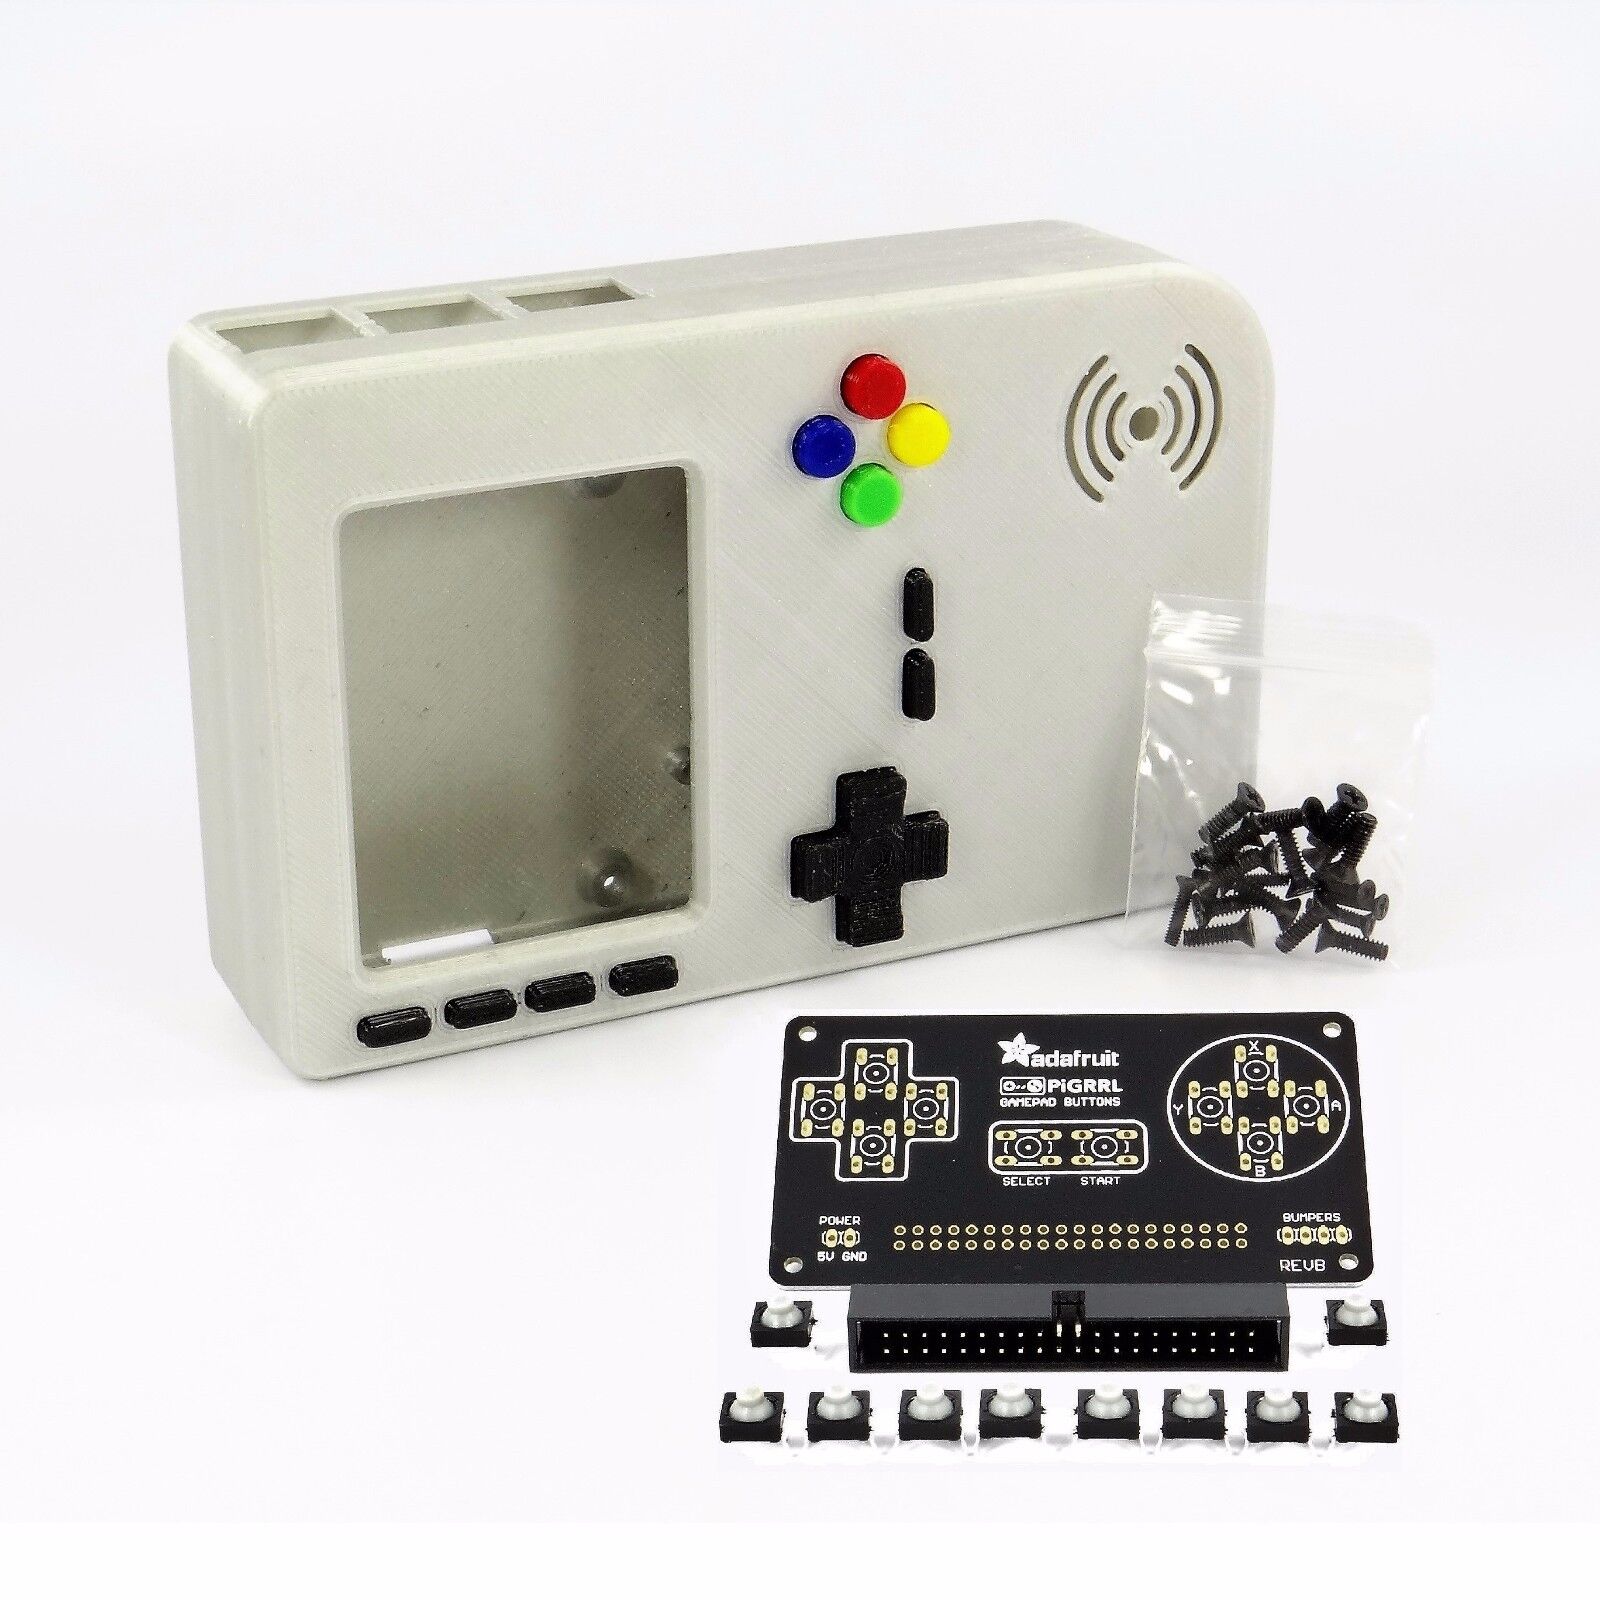 PiGRRL 2 Case/Buttons GAMEPAD PCB/SOFT-TACT/BOX HEADER for Raspberry Pi Gameboy